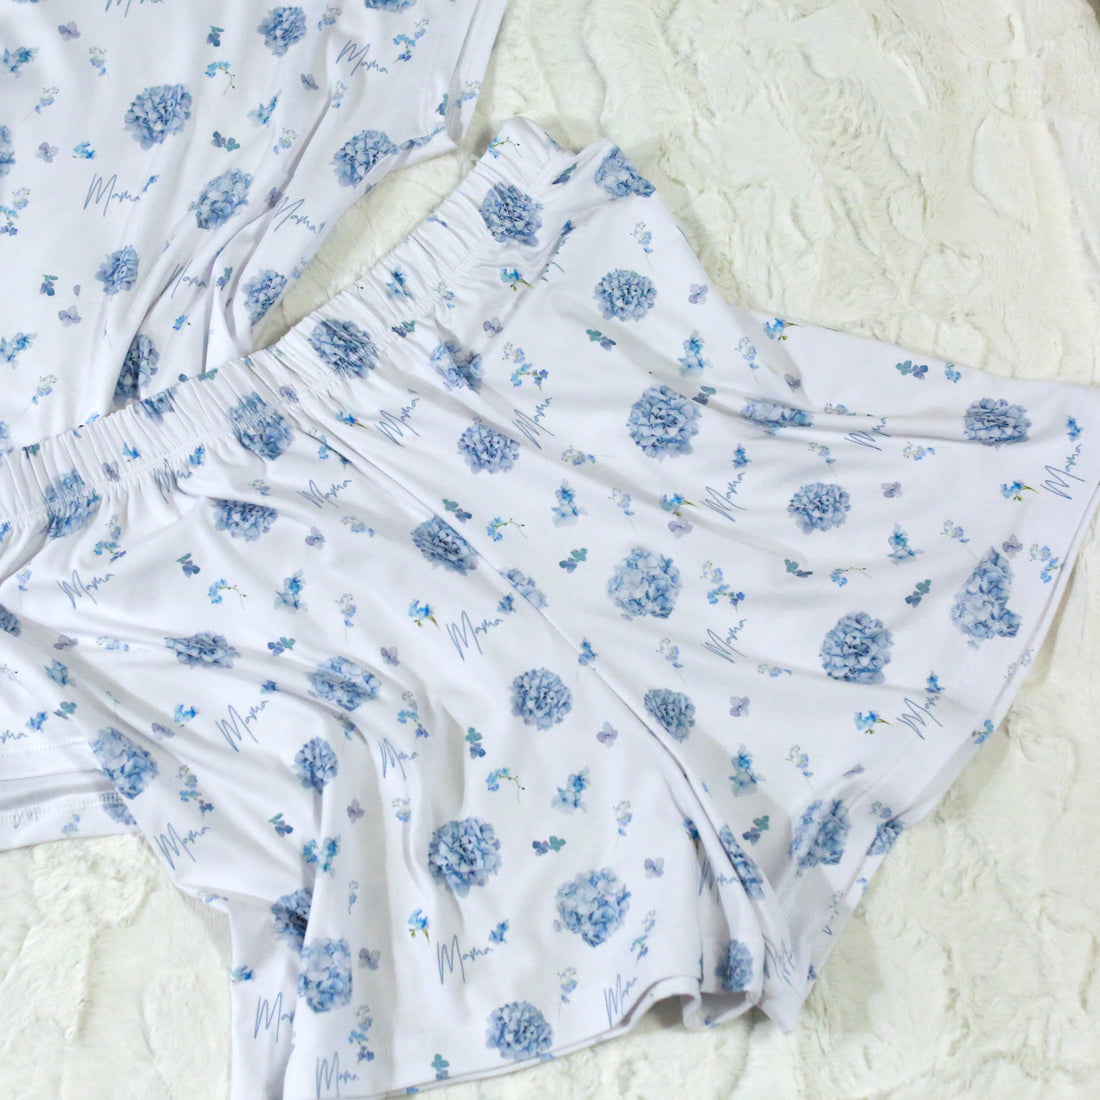 Mary's Blue Floral Mom Pajamas for Women